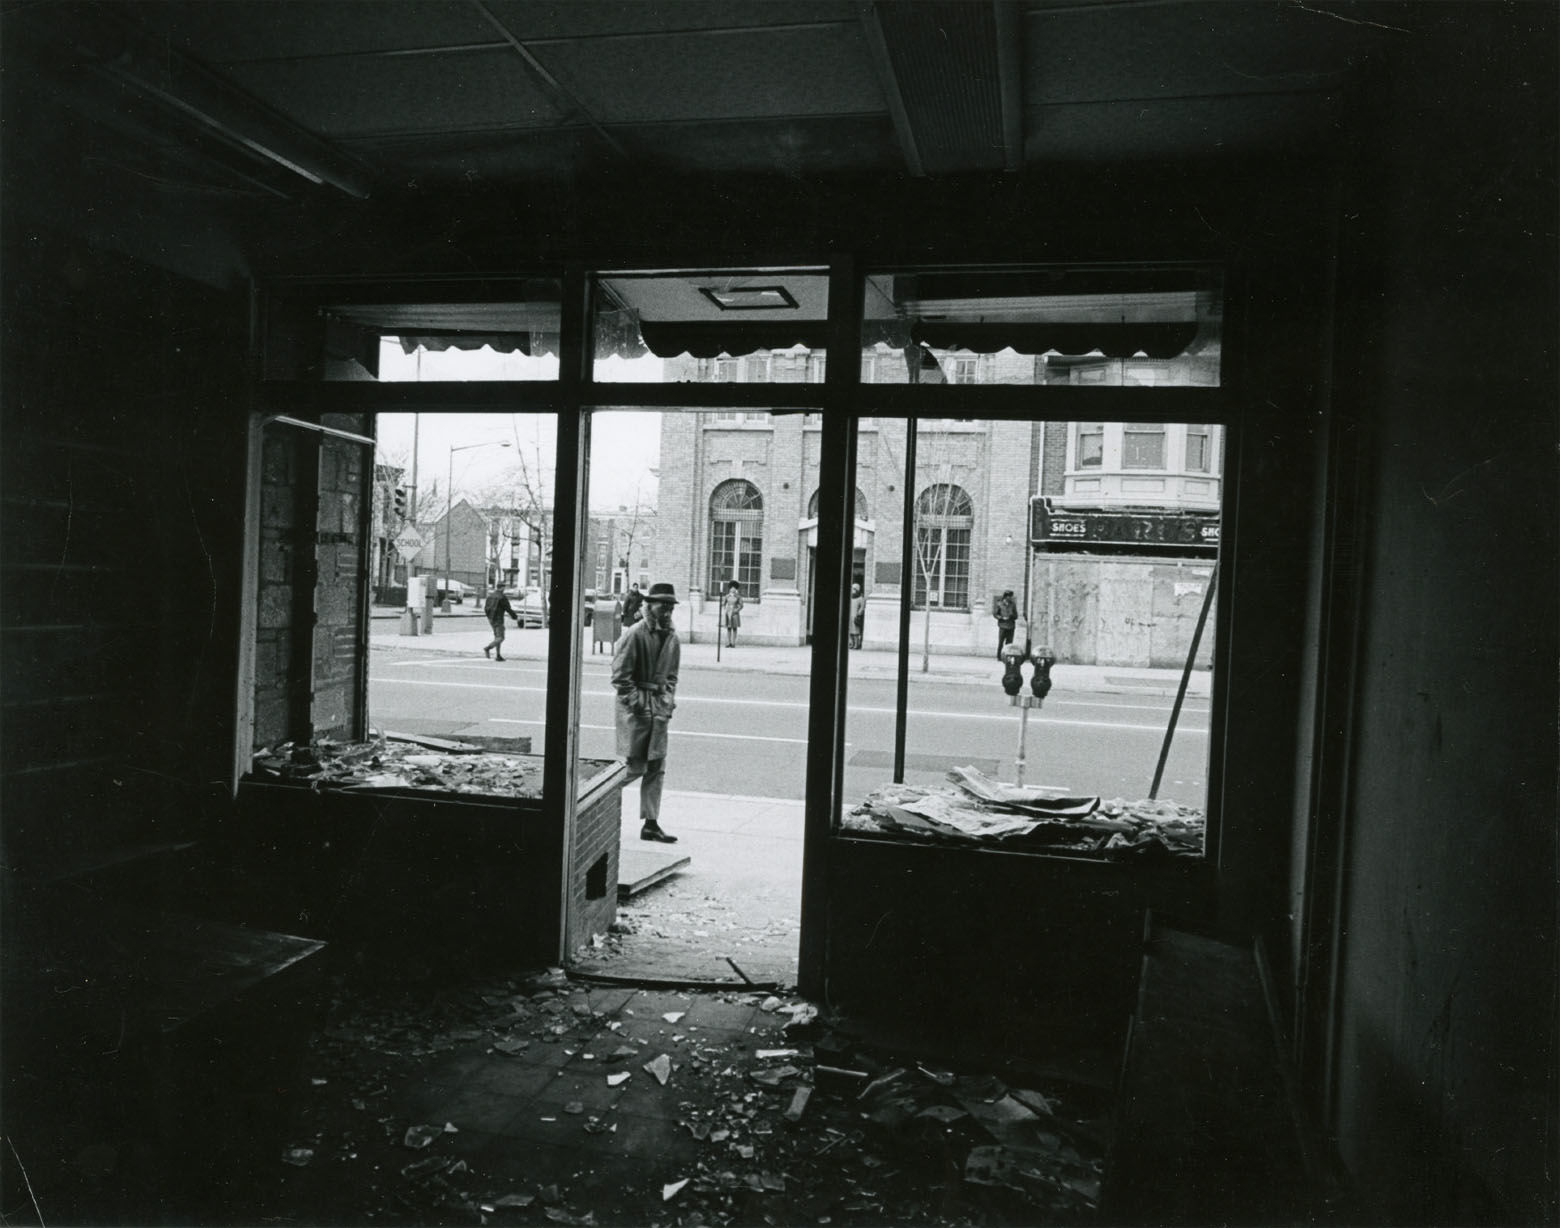 Broken windows and shattered glass in a battered store. Reprinted with permission of the DC Public Library, Star Collection, © Washington Post.